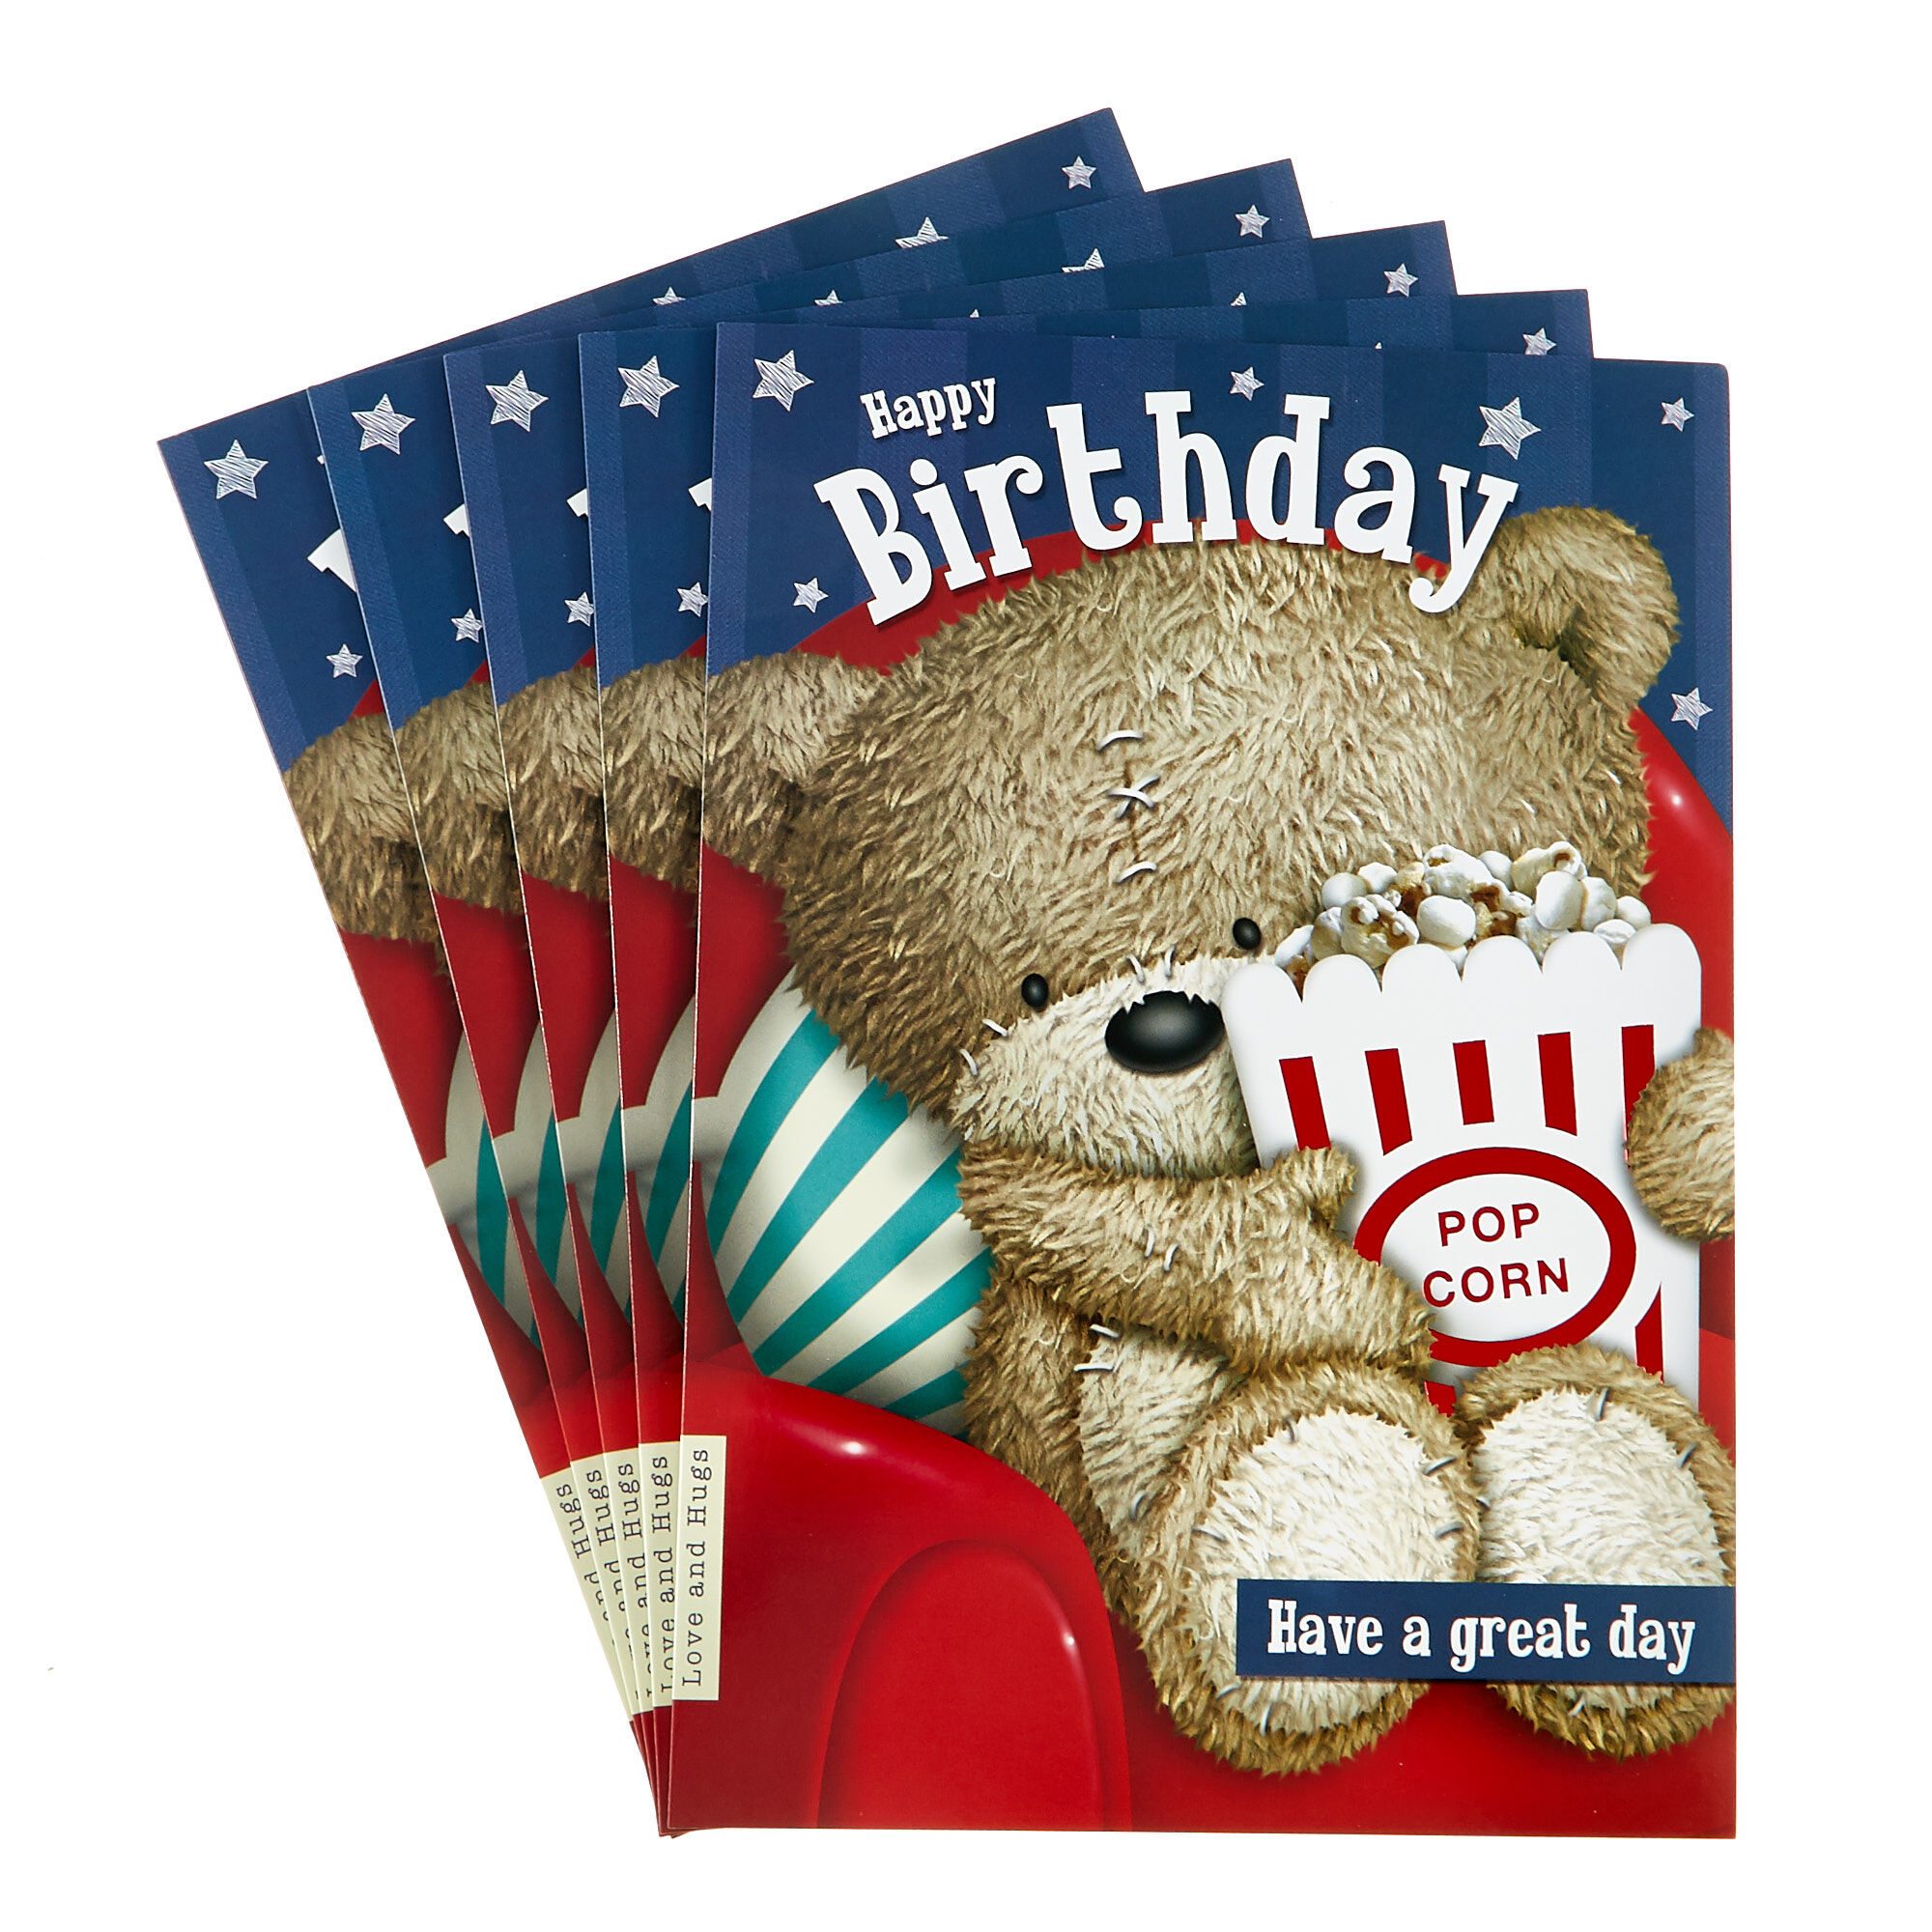 THANK YOU MULTI PACK OF CARDS partycascades ASSORTED DESIGNS 